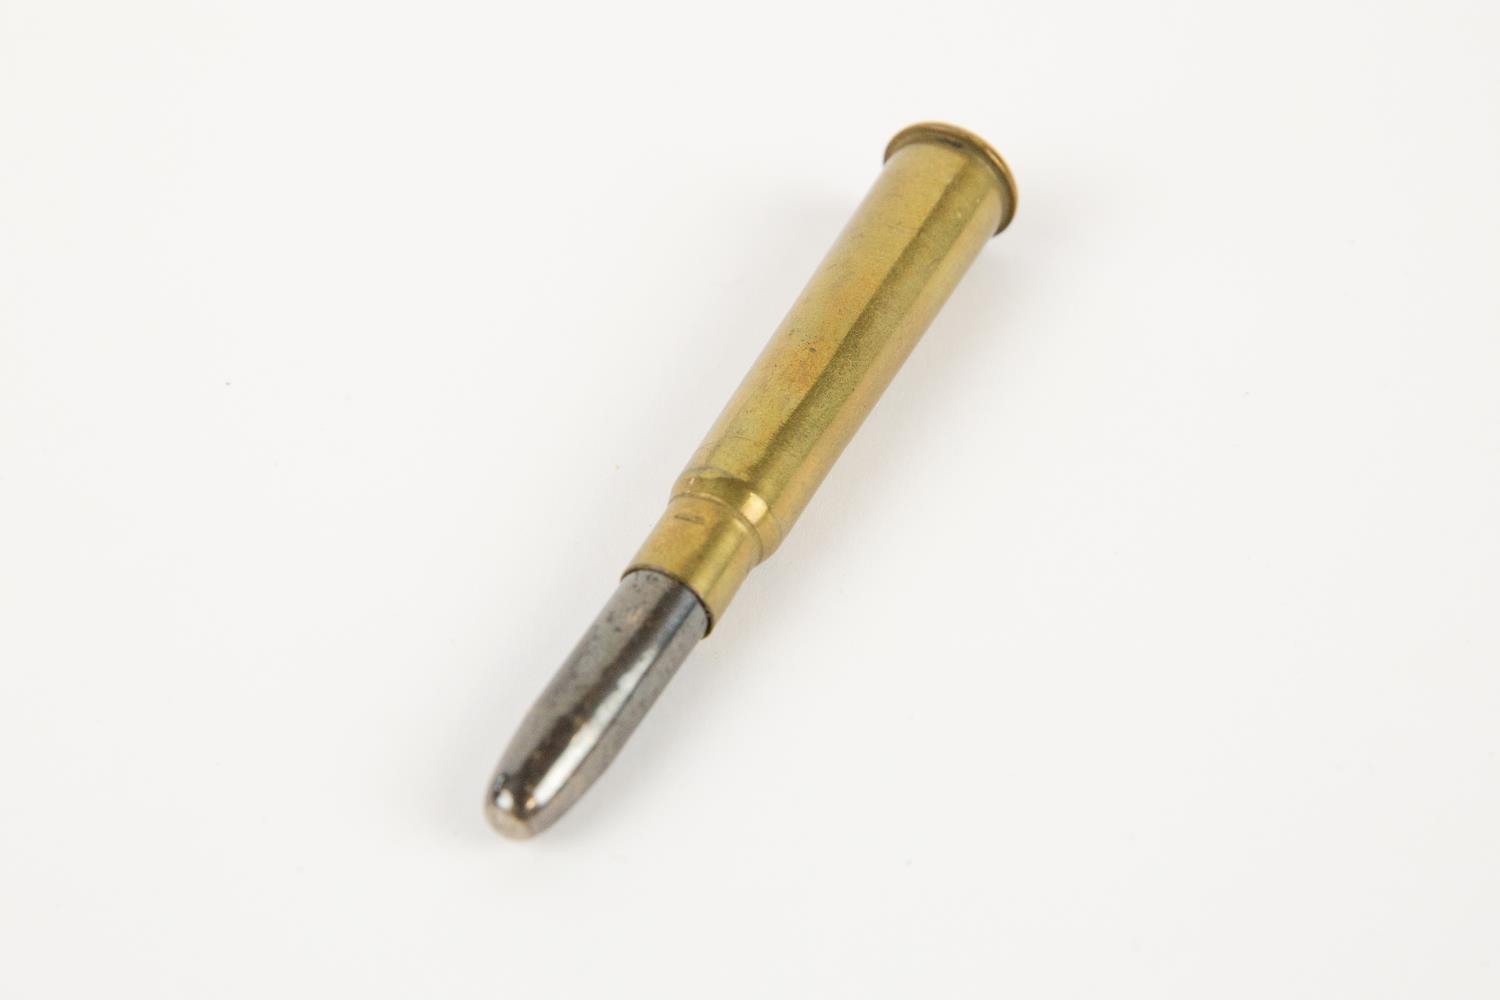 A "bullet pencil" as issued with Christmas 1914 Princess Mary's gift tins, the brass case with